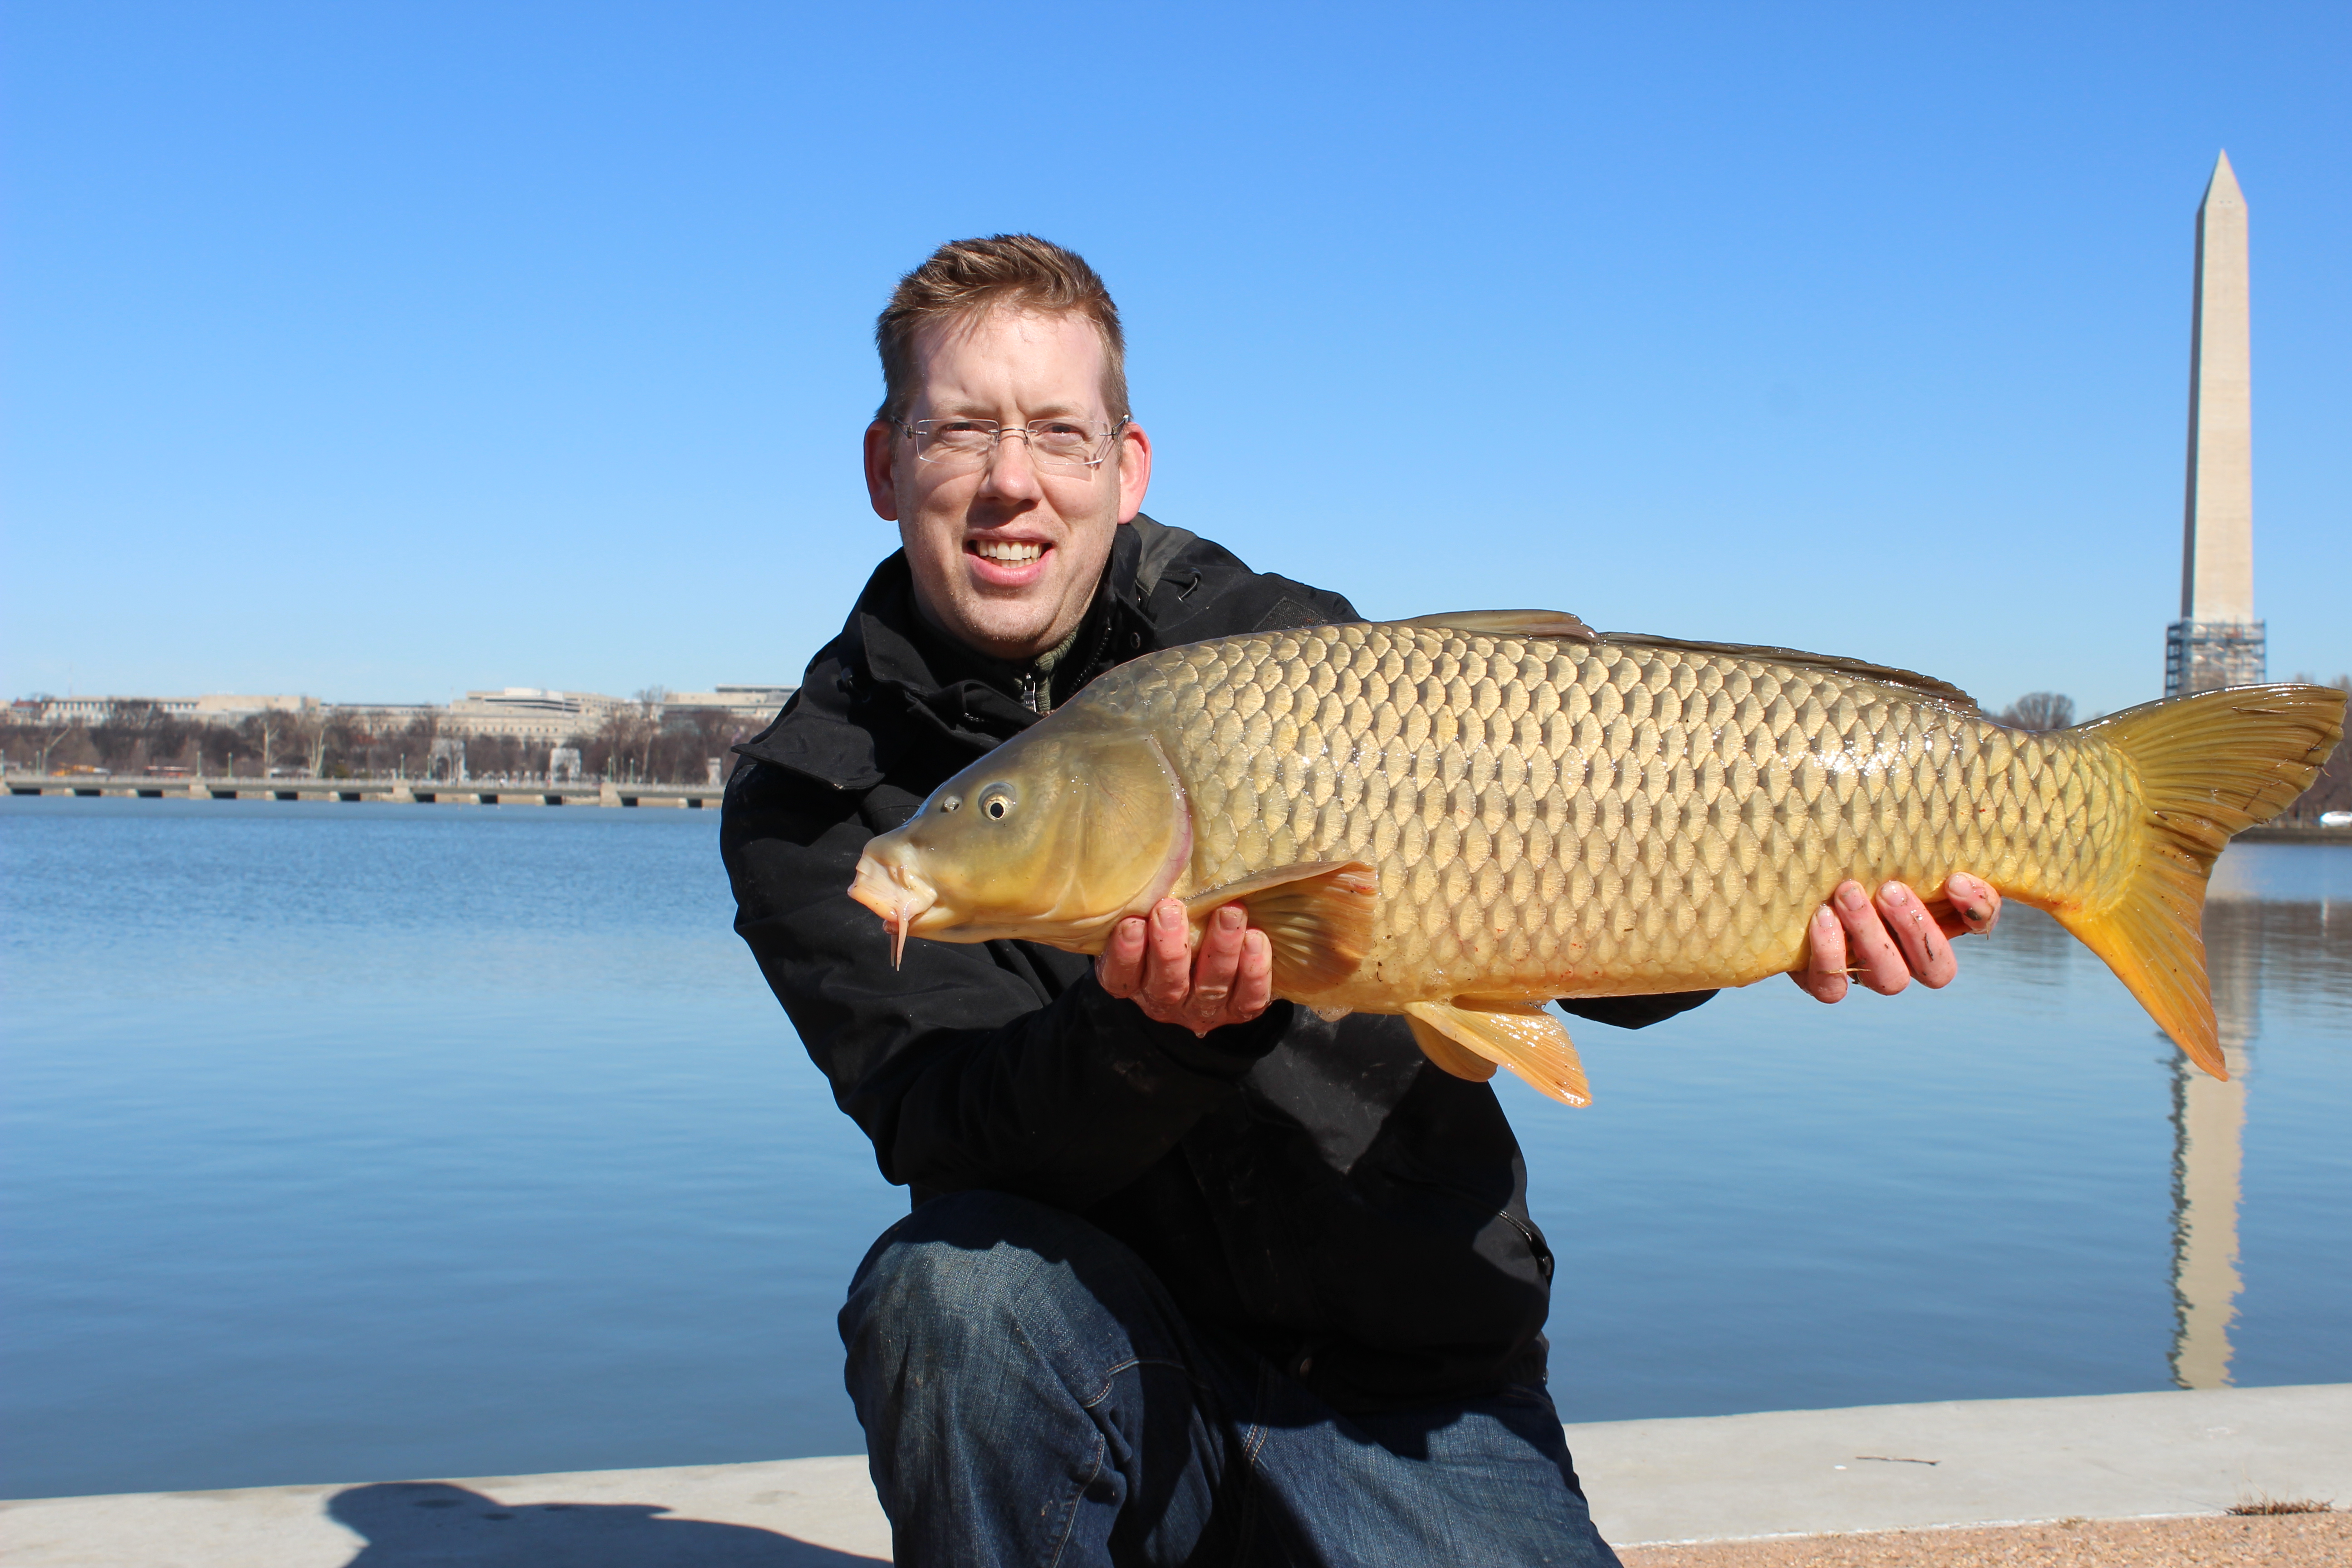 A nice 20 lb carp I caught on my best winter stick mix: bread crumb and sweet corn coated in a Nash sweet corn attractant.